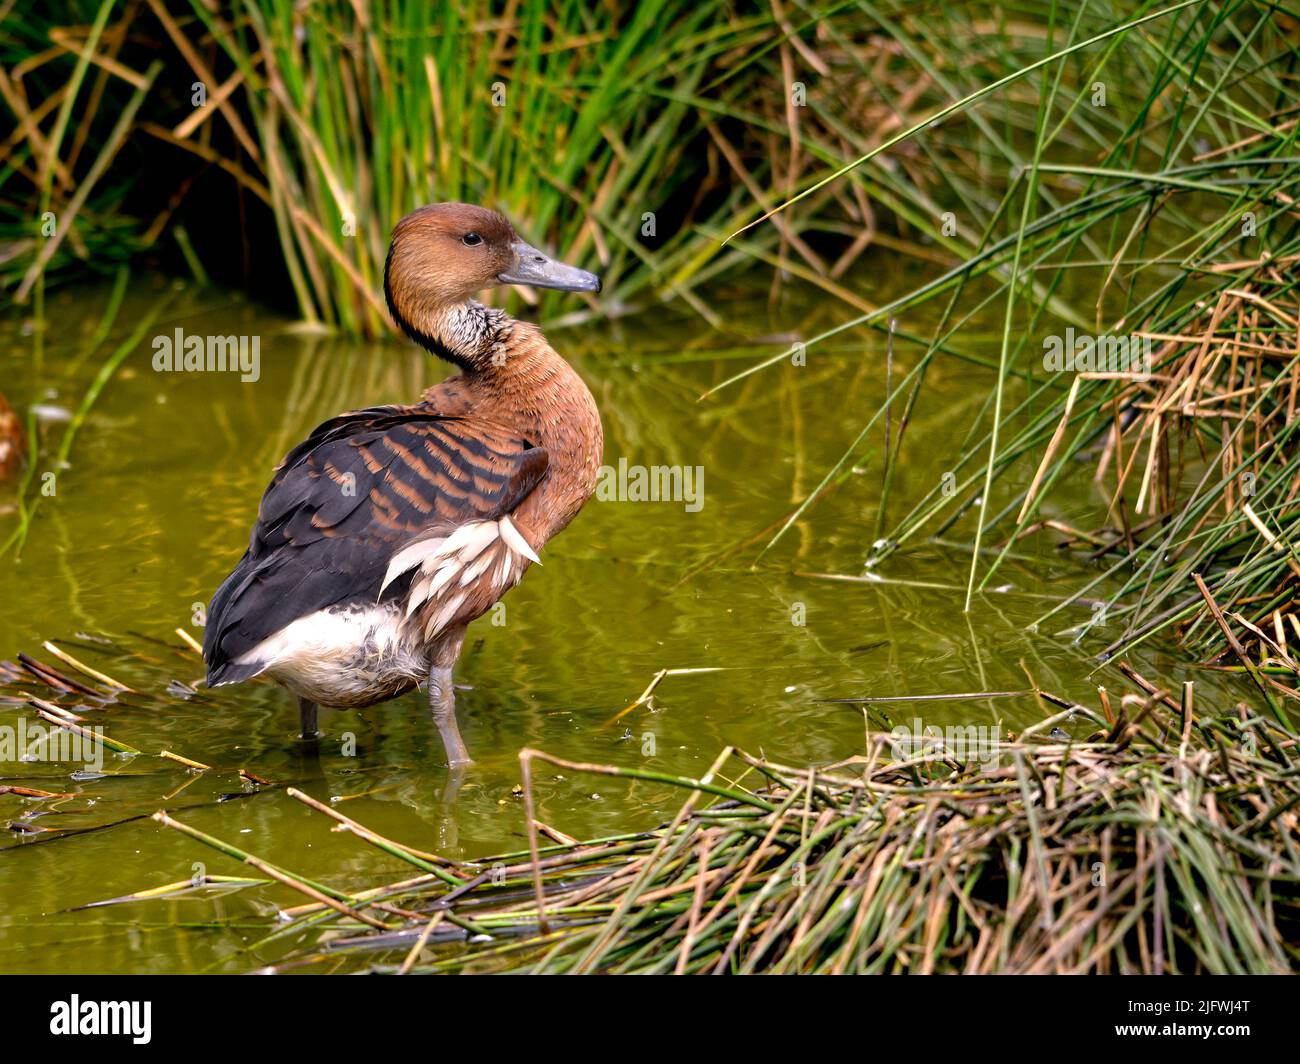 Fulvous Whistling Duck or fulvous tree ducks (Dendrocygna bicolor) standing in water among plants Stock Photo